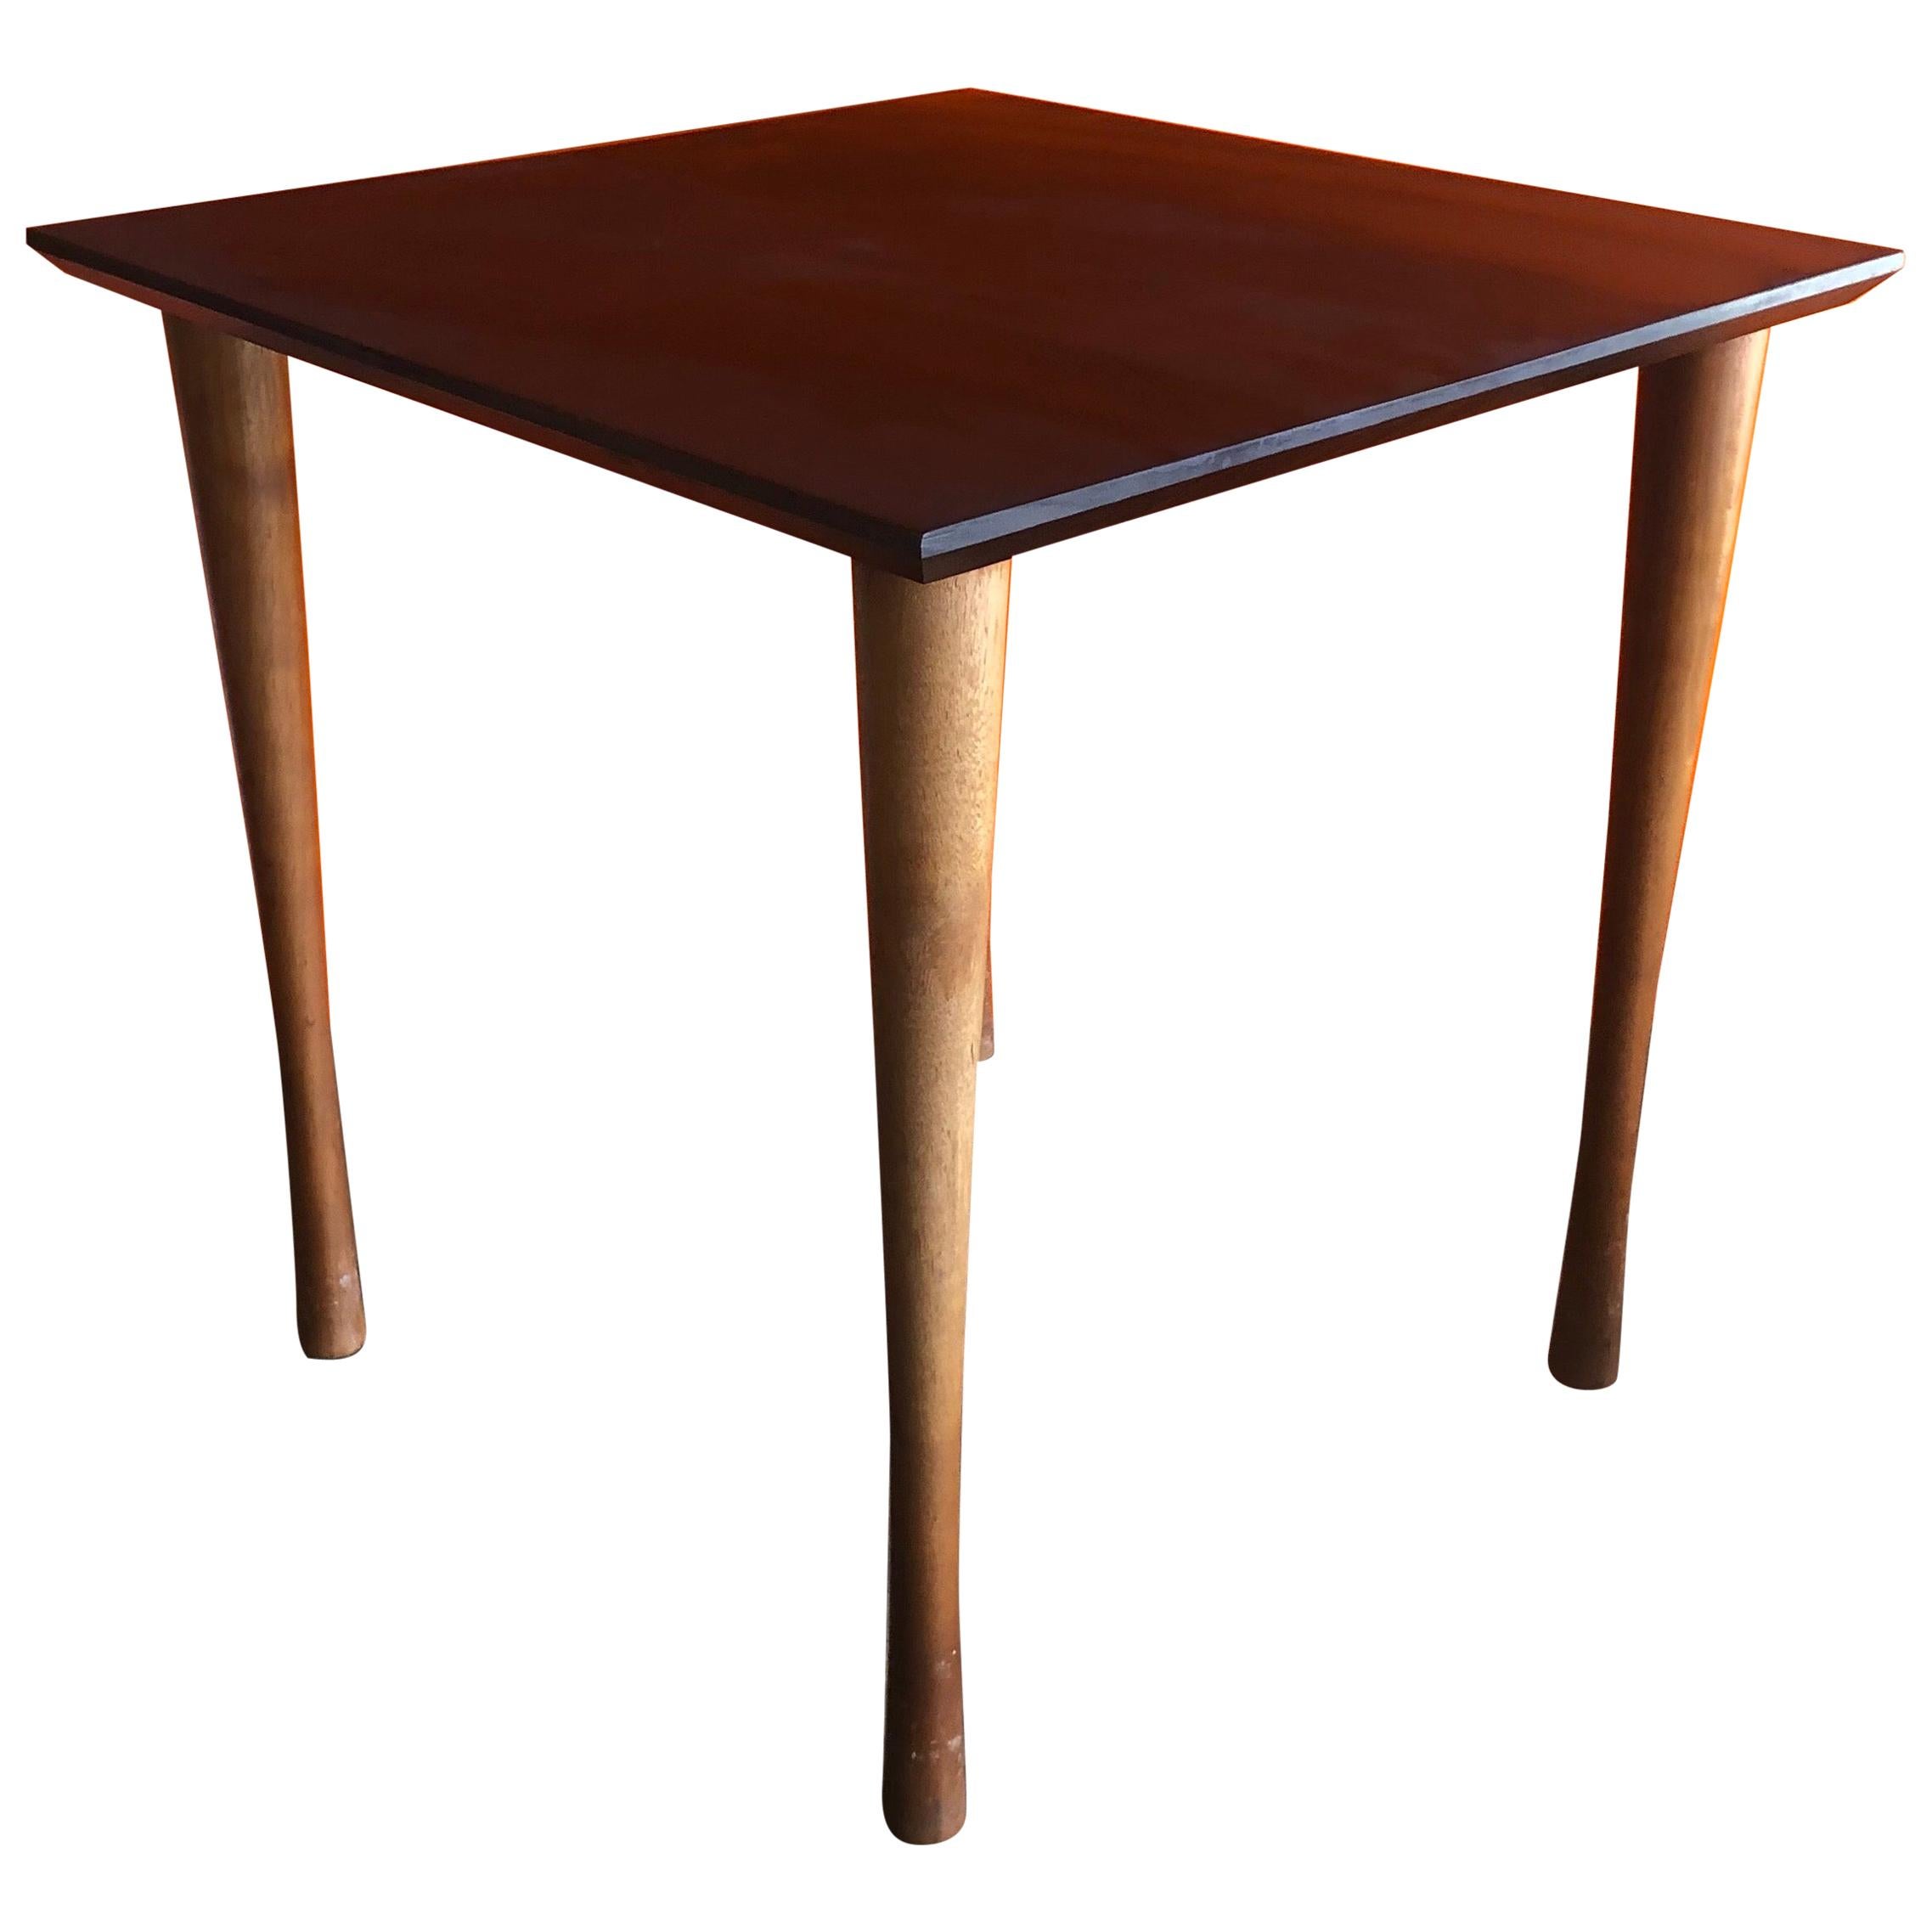 Midcentury Black Slate and Walnut Side Table by Harpswell House